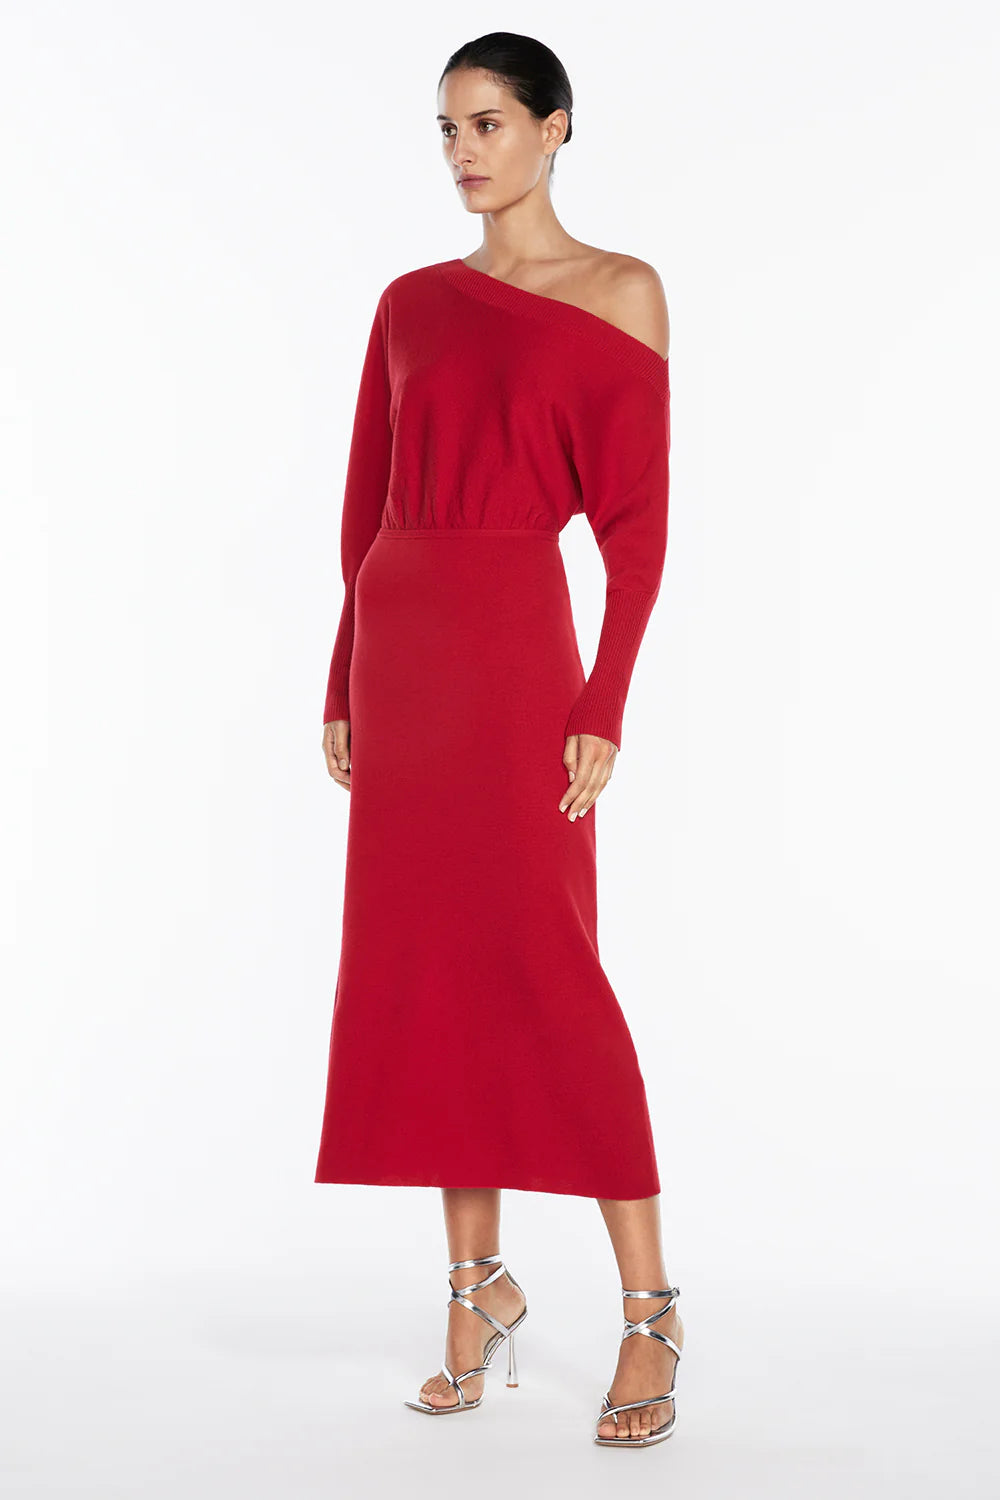 *PREORDER* ENERGY SHIFT KNIT DRESS - RED